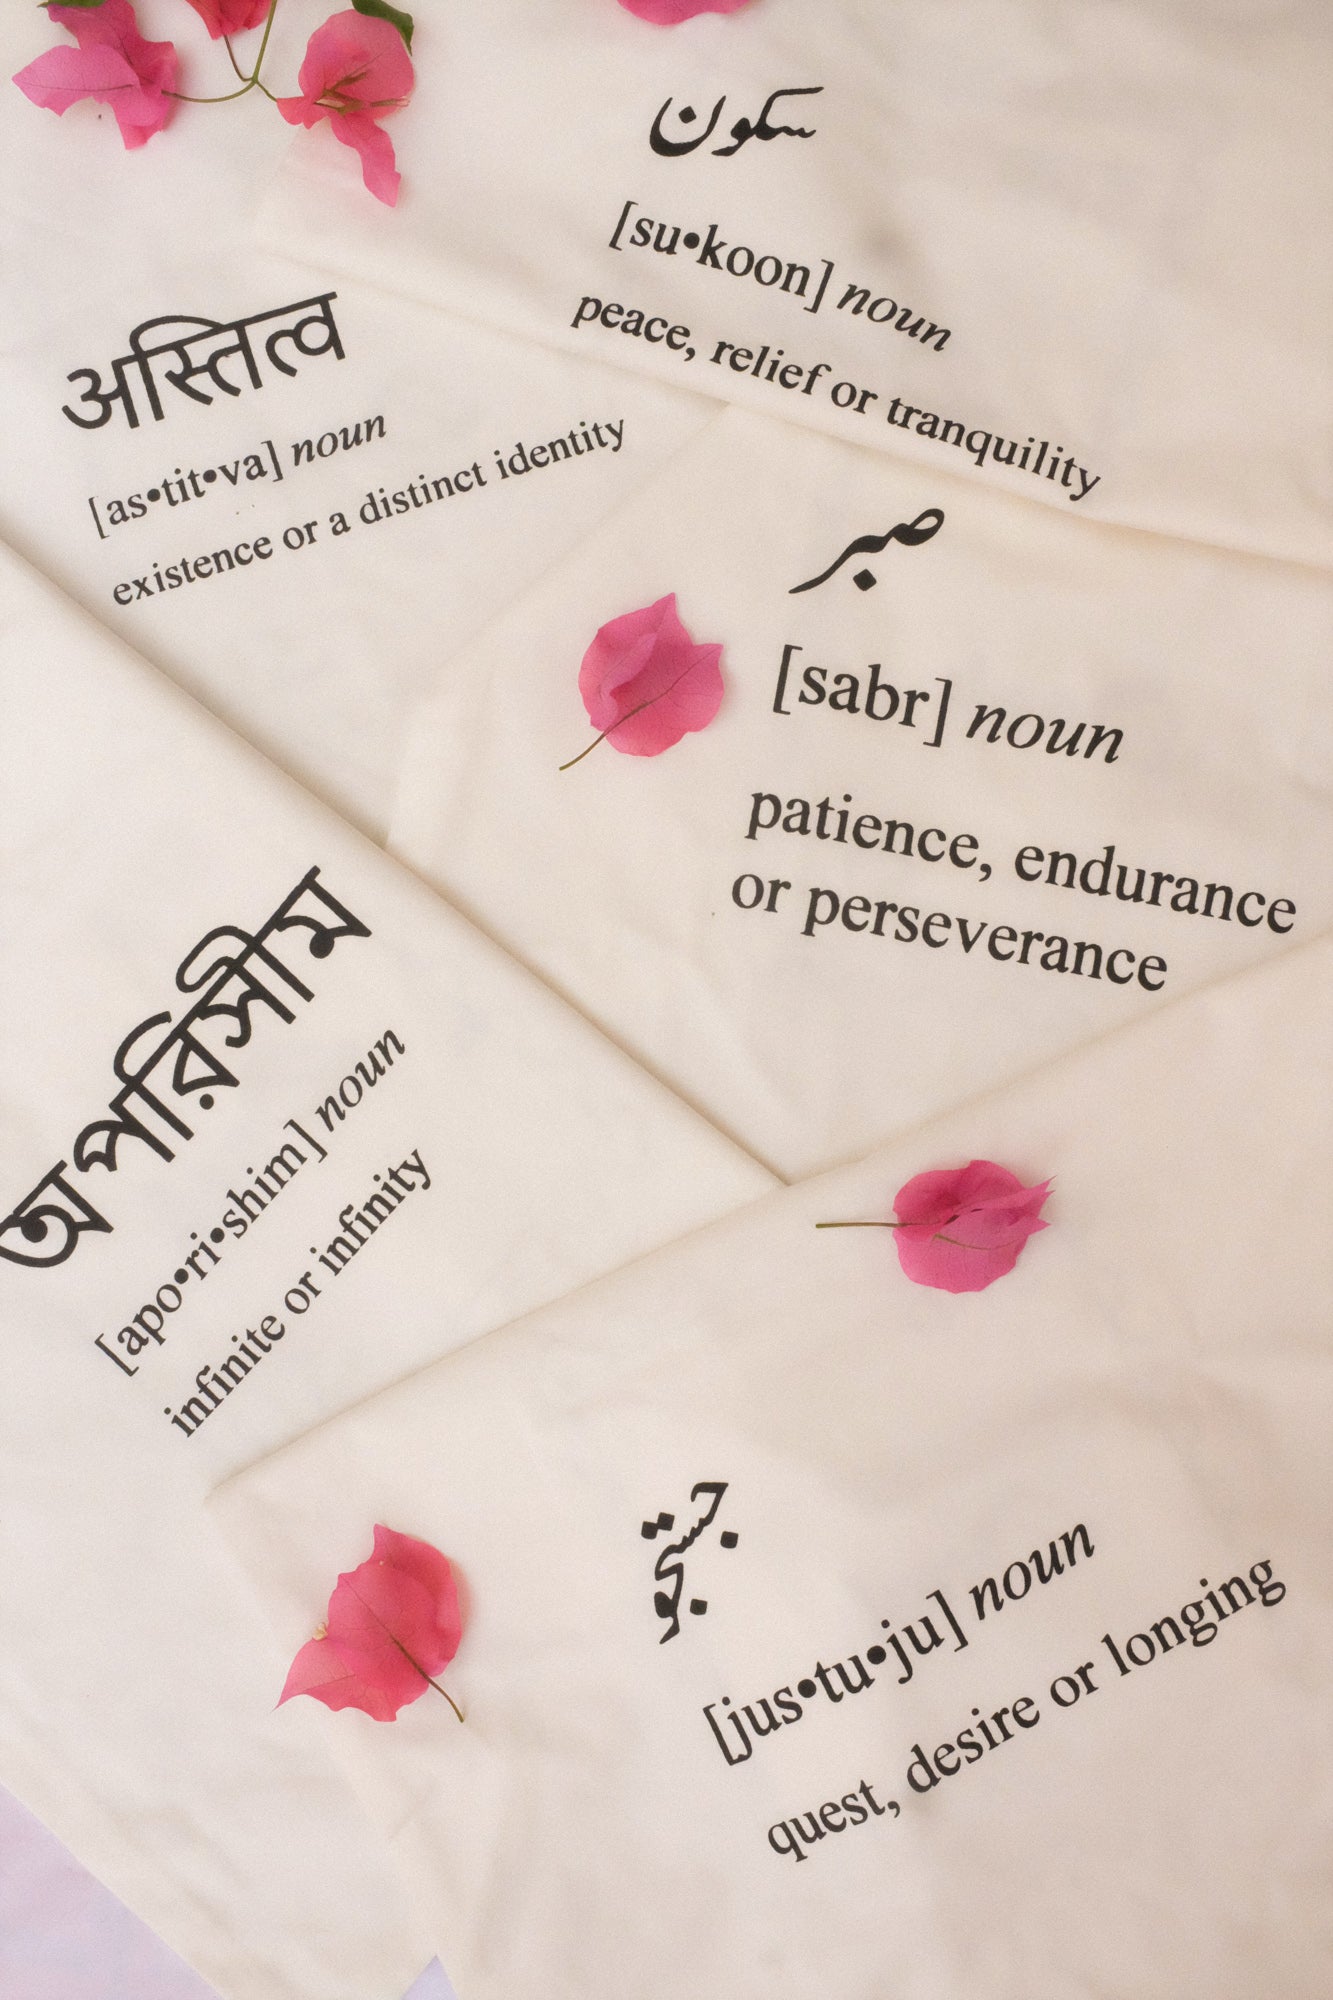 Daak Words of Affirmation Tote Bags in White